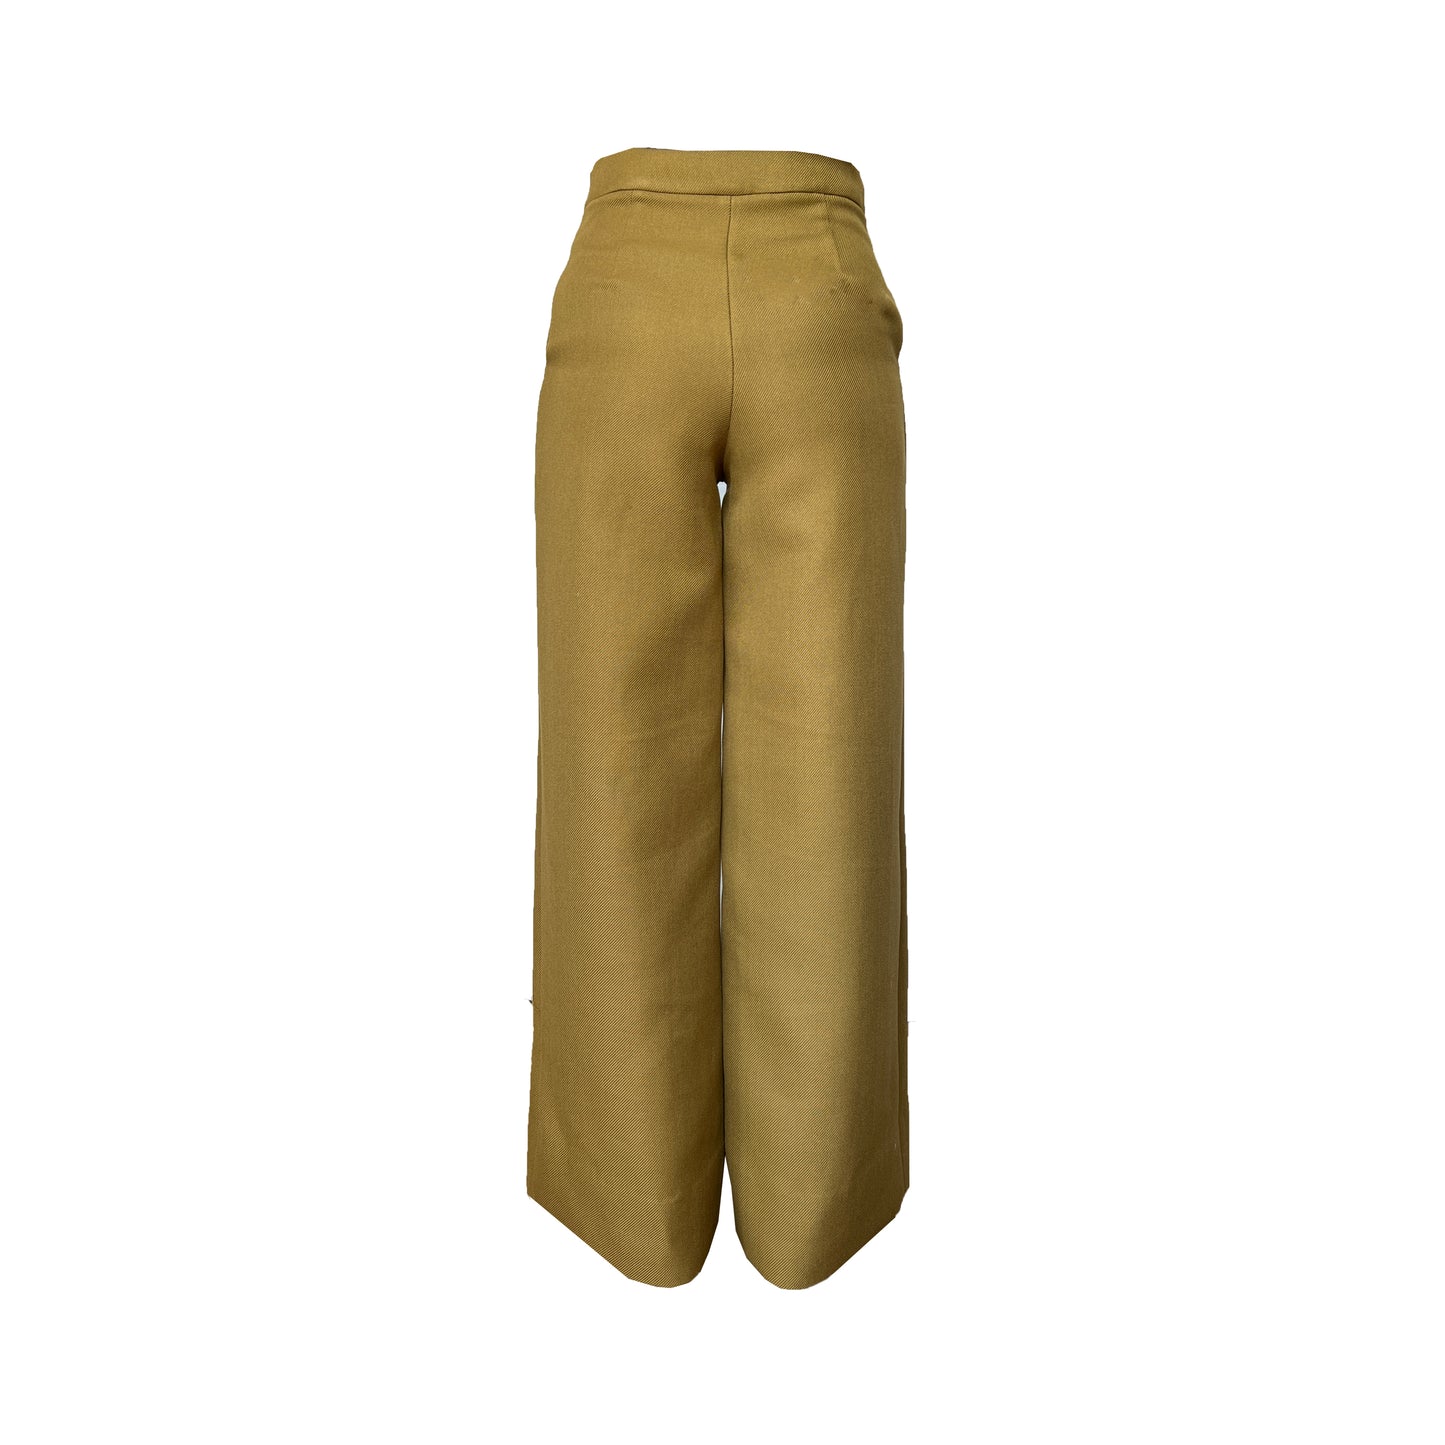 Back of brown dark mustard two tone high-waisted wide leg pant with slanted side seam